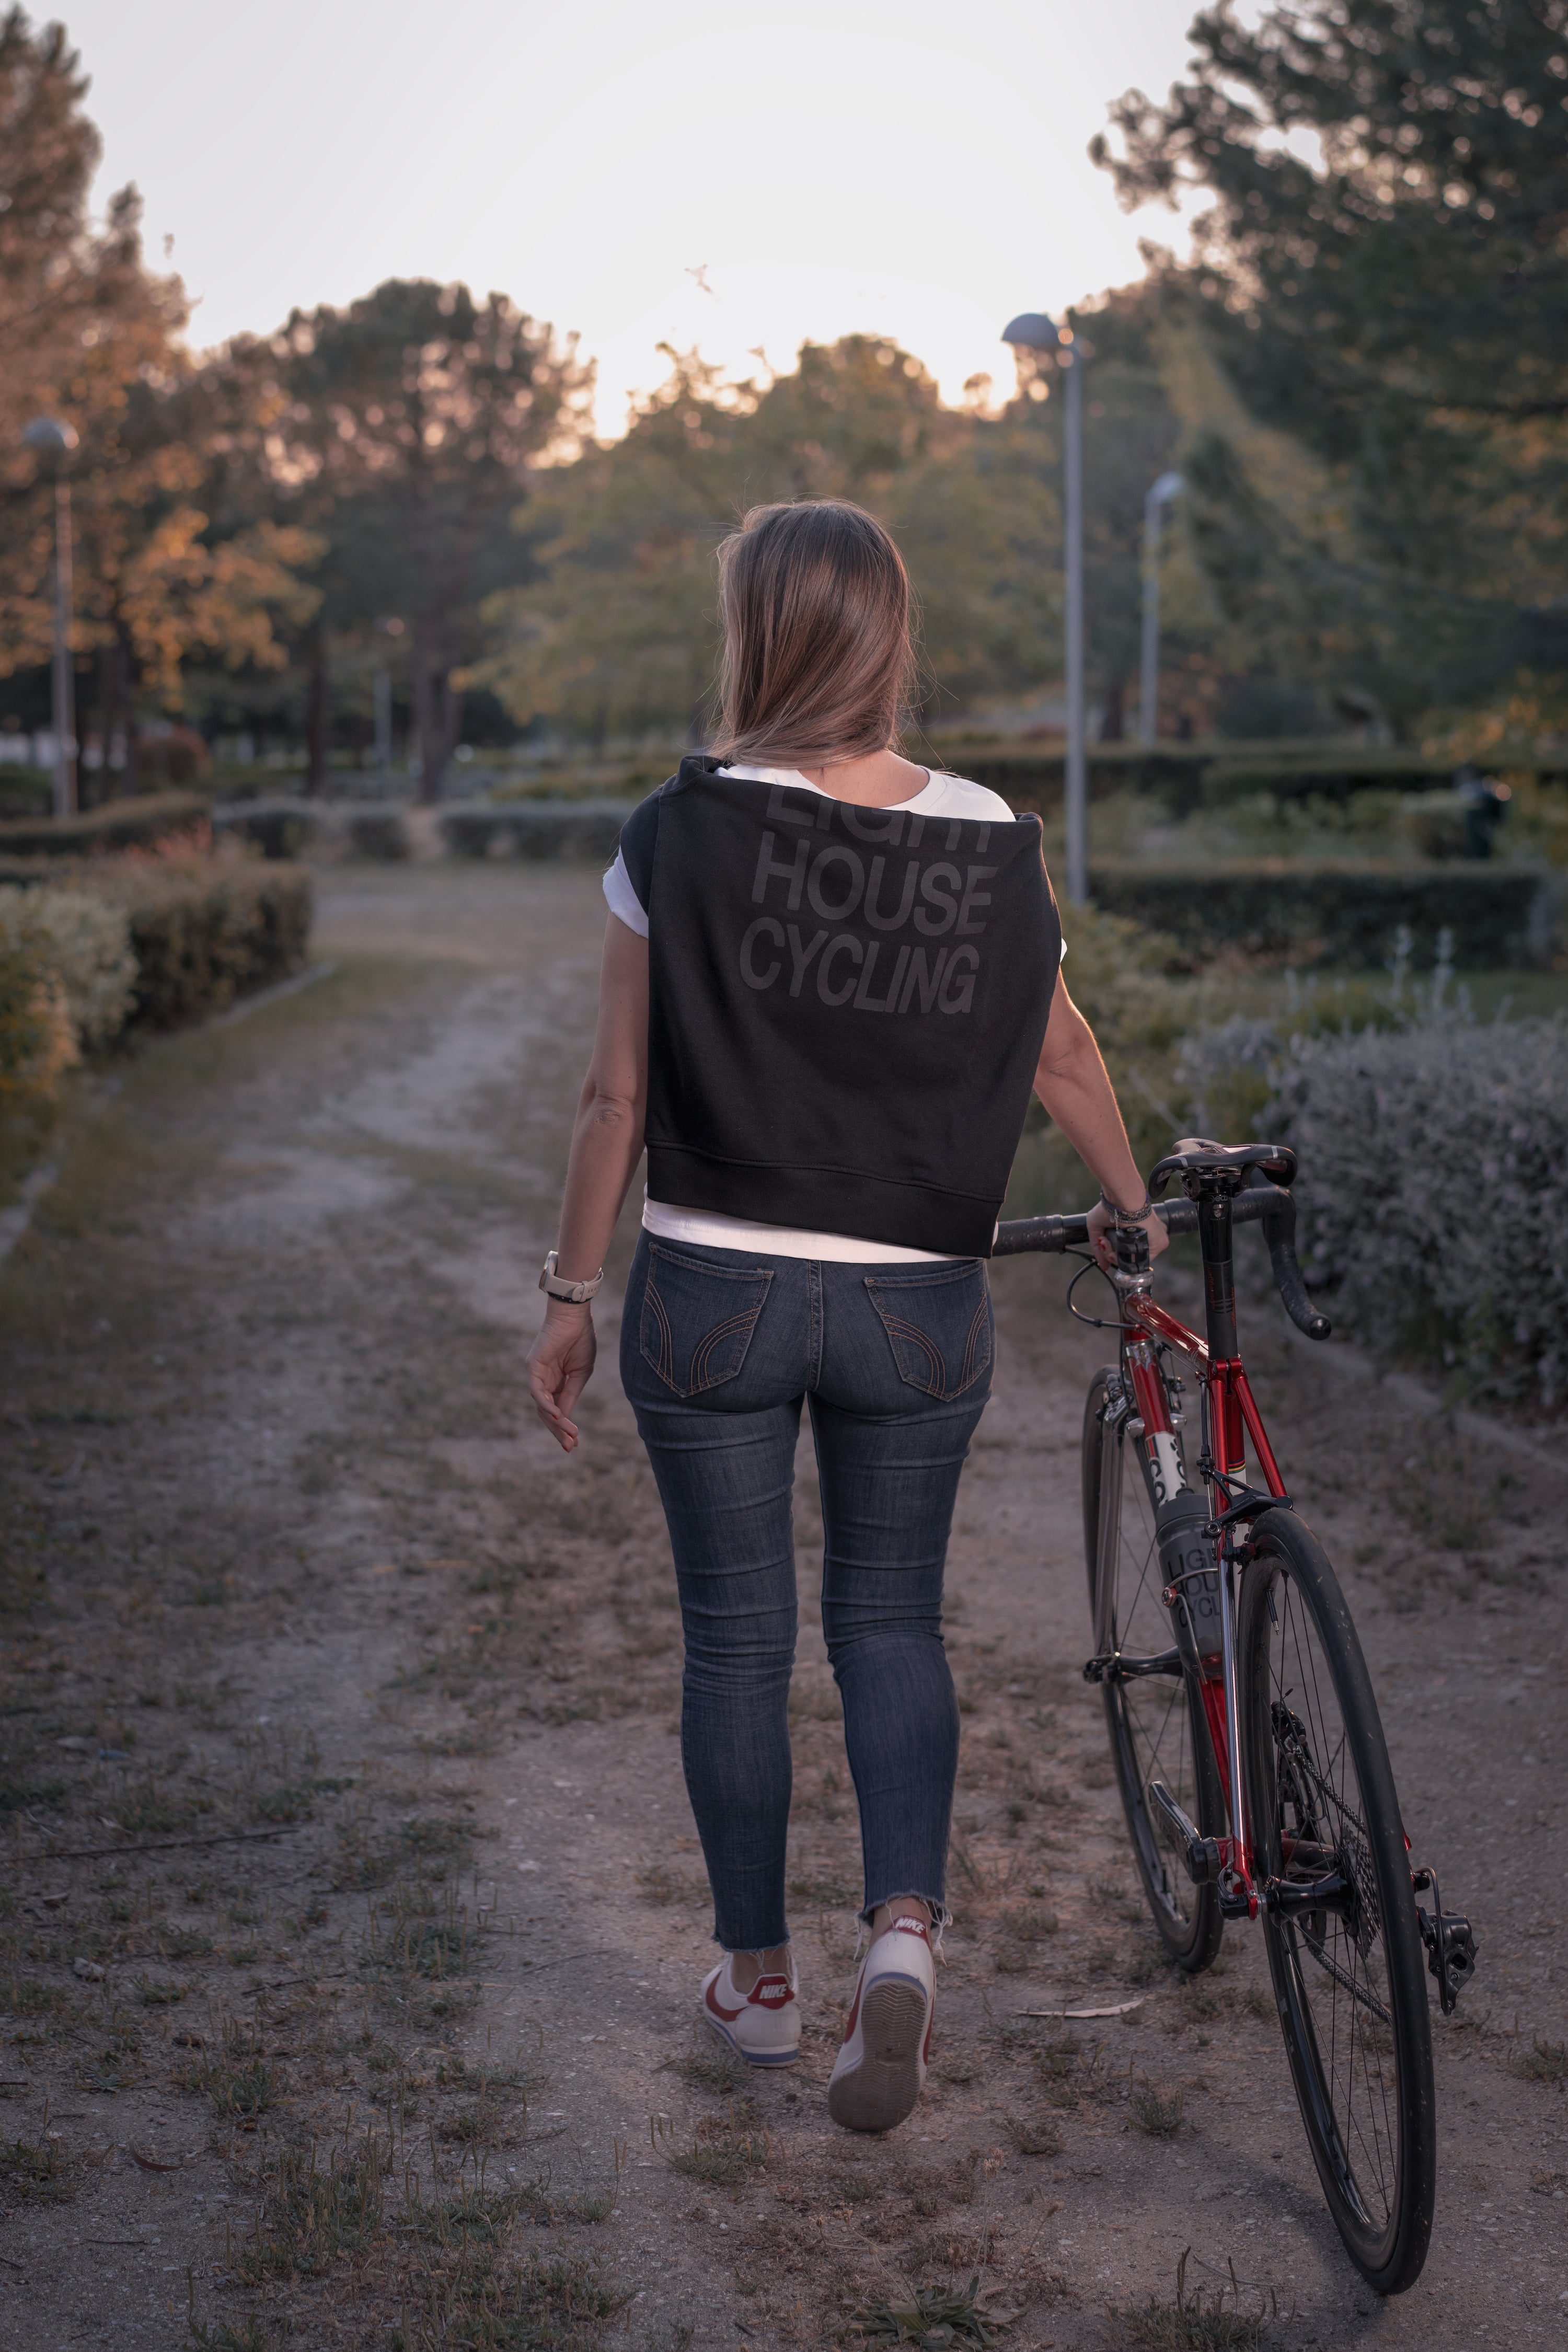 Lighthouse cycling apparel - brand made by and for cyclists